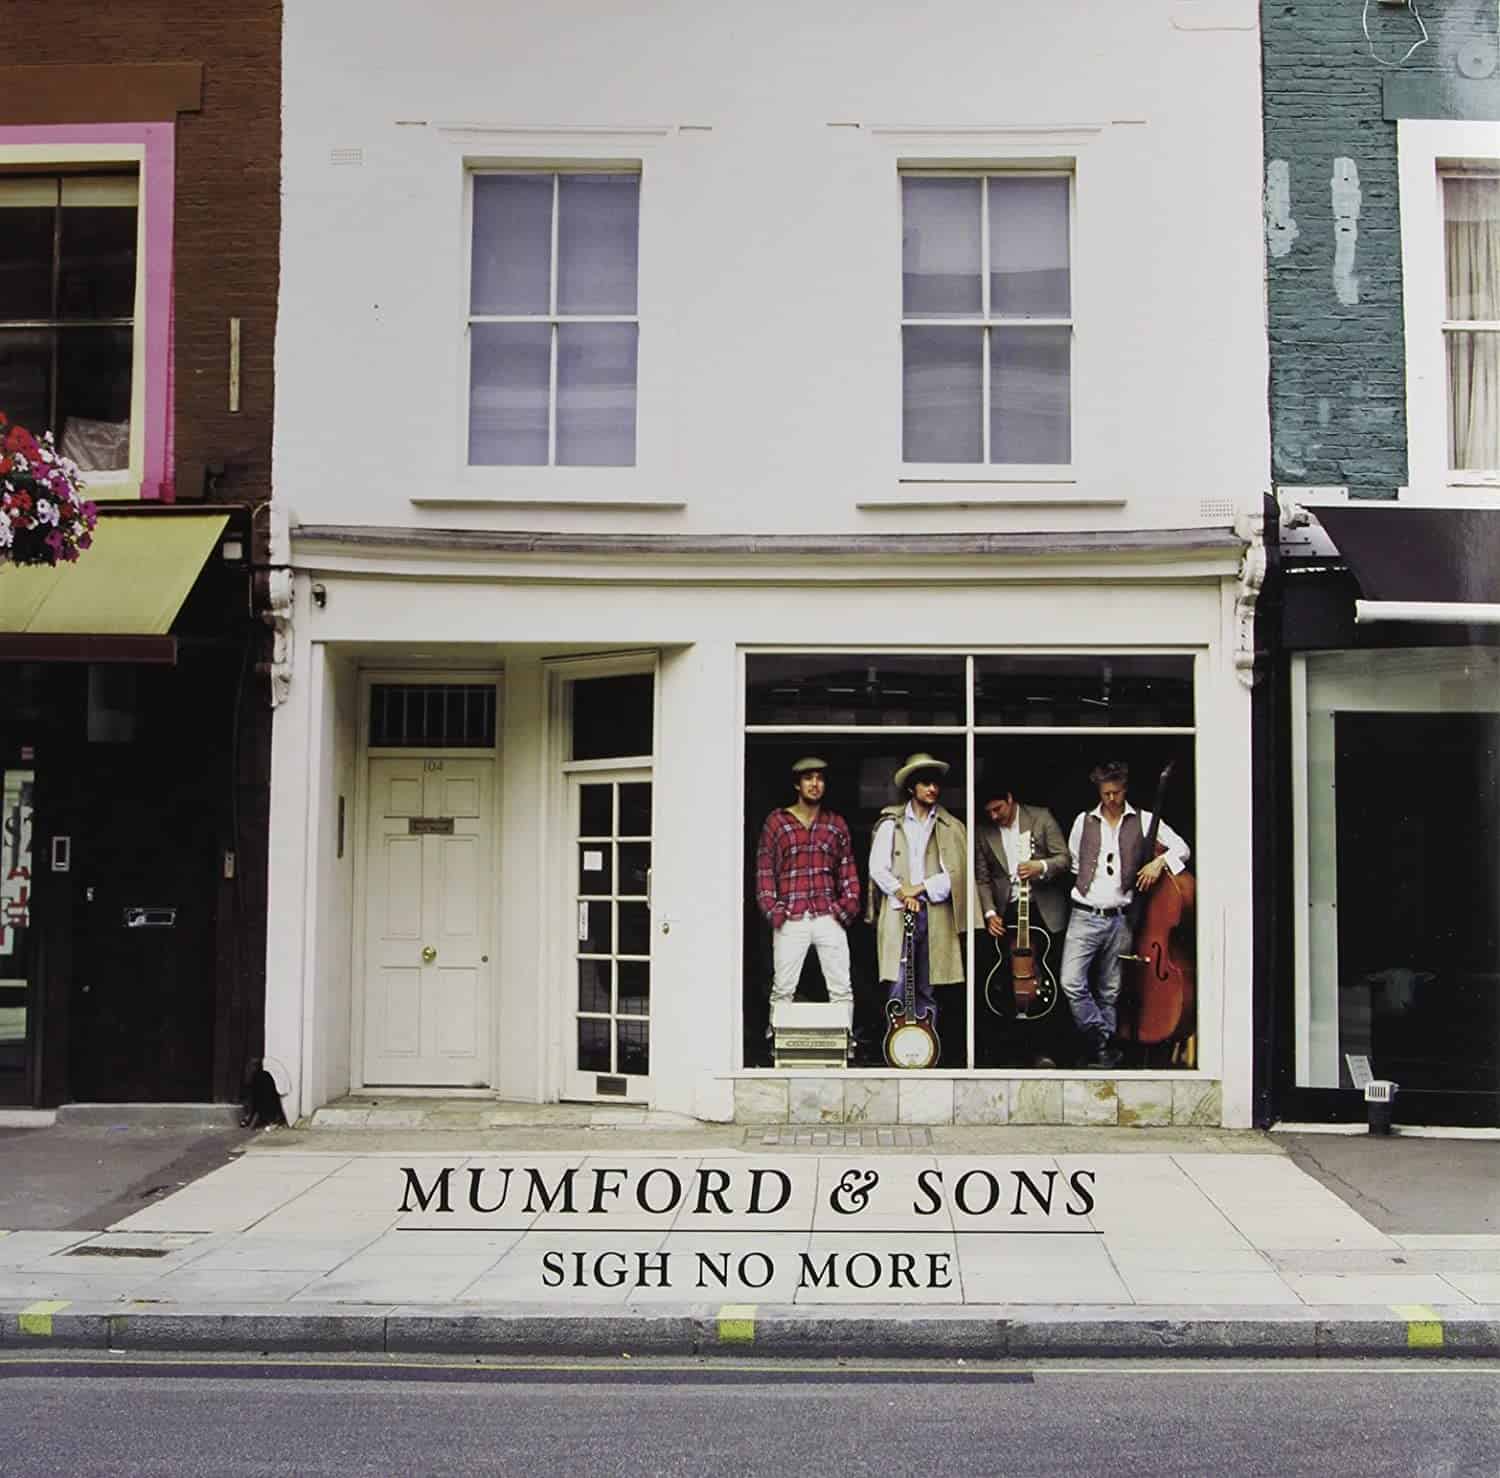 Mumford-And-Sons-Sigh-No-More-LP-vinyl-record-album-front